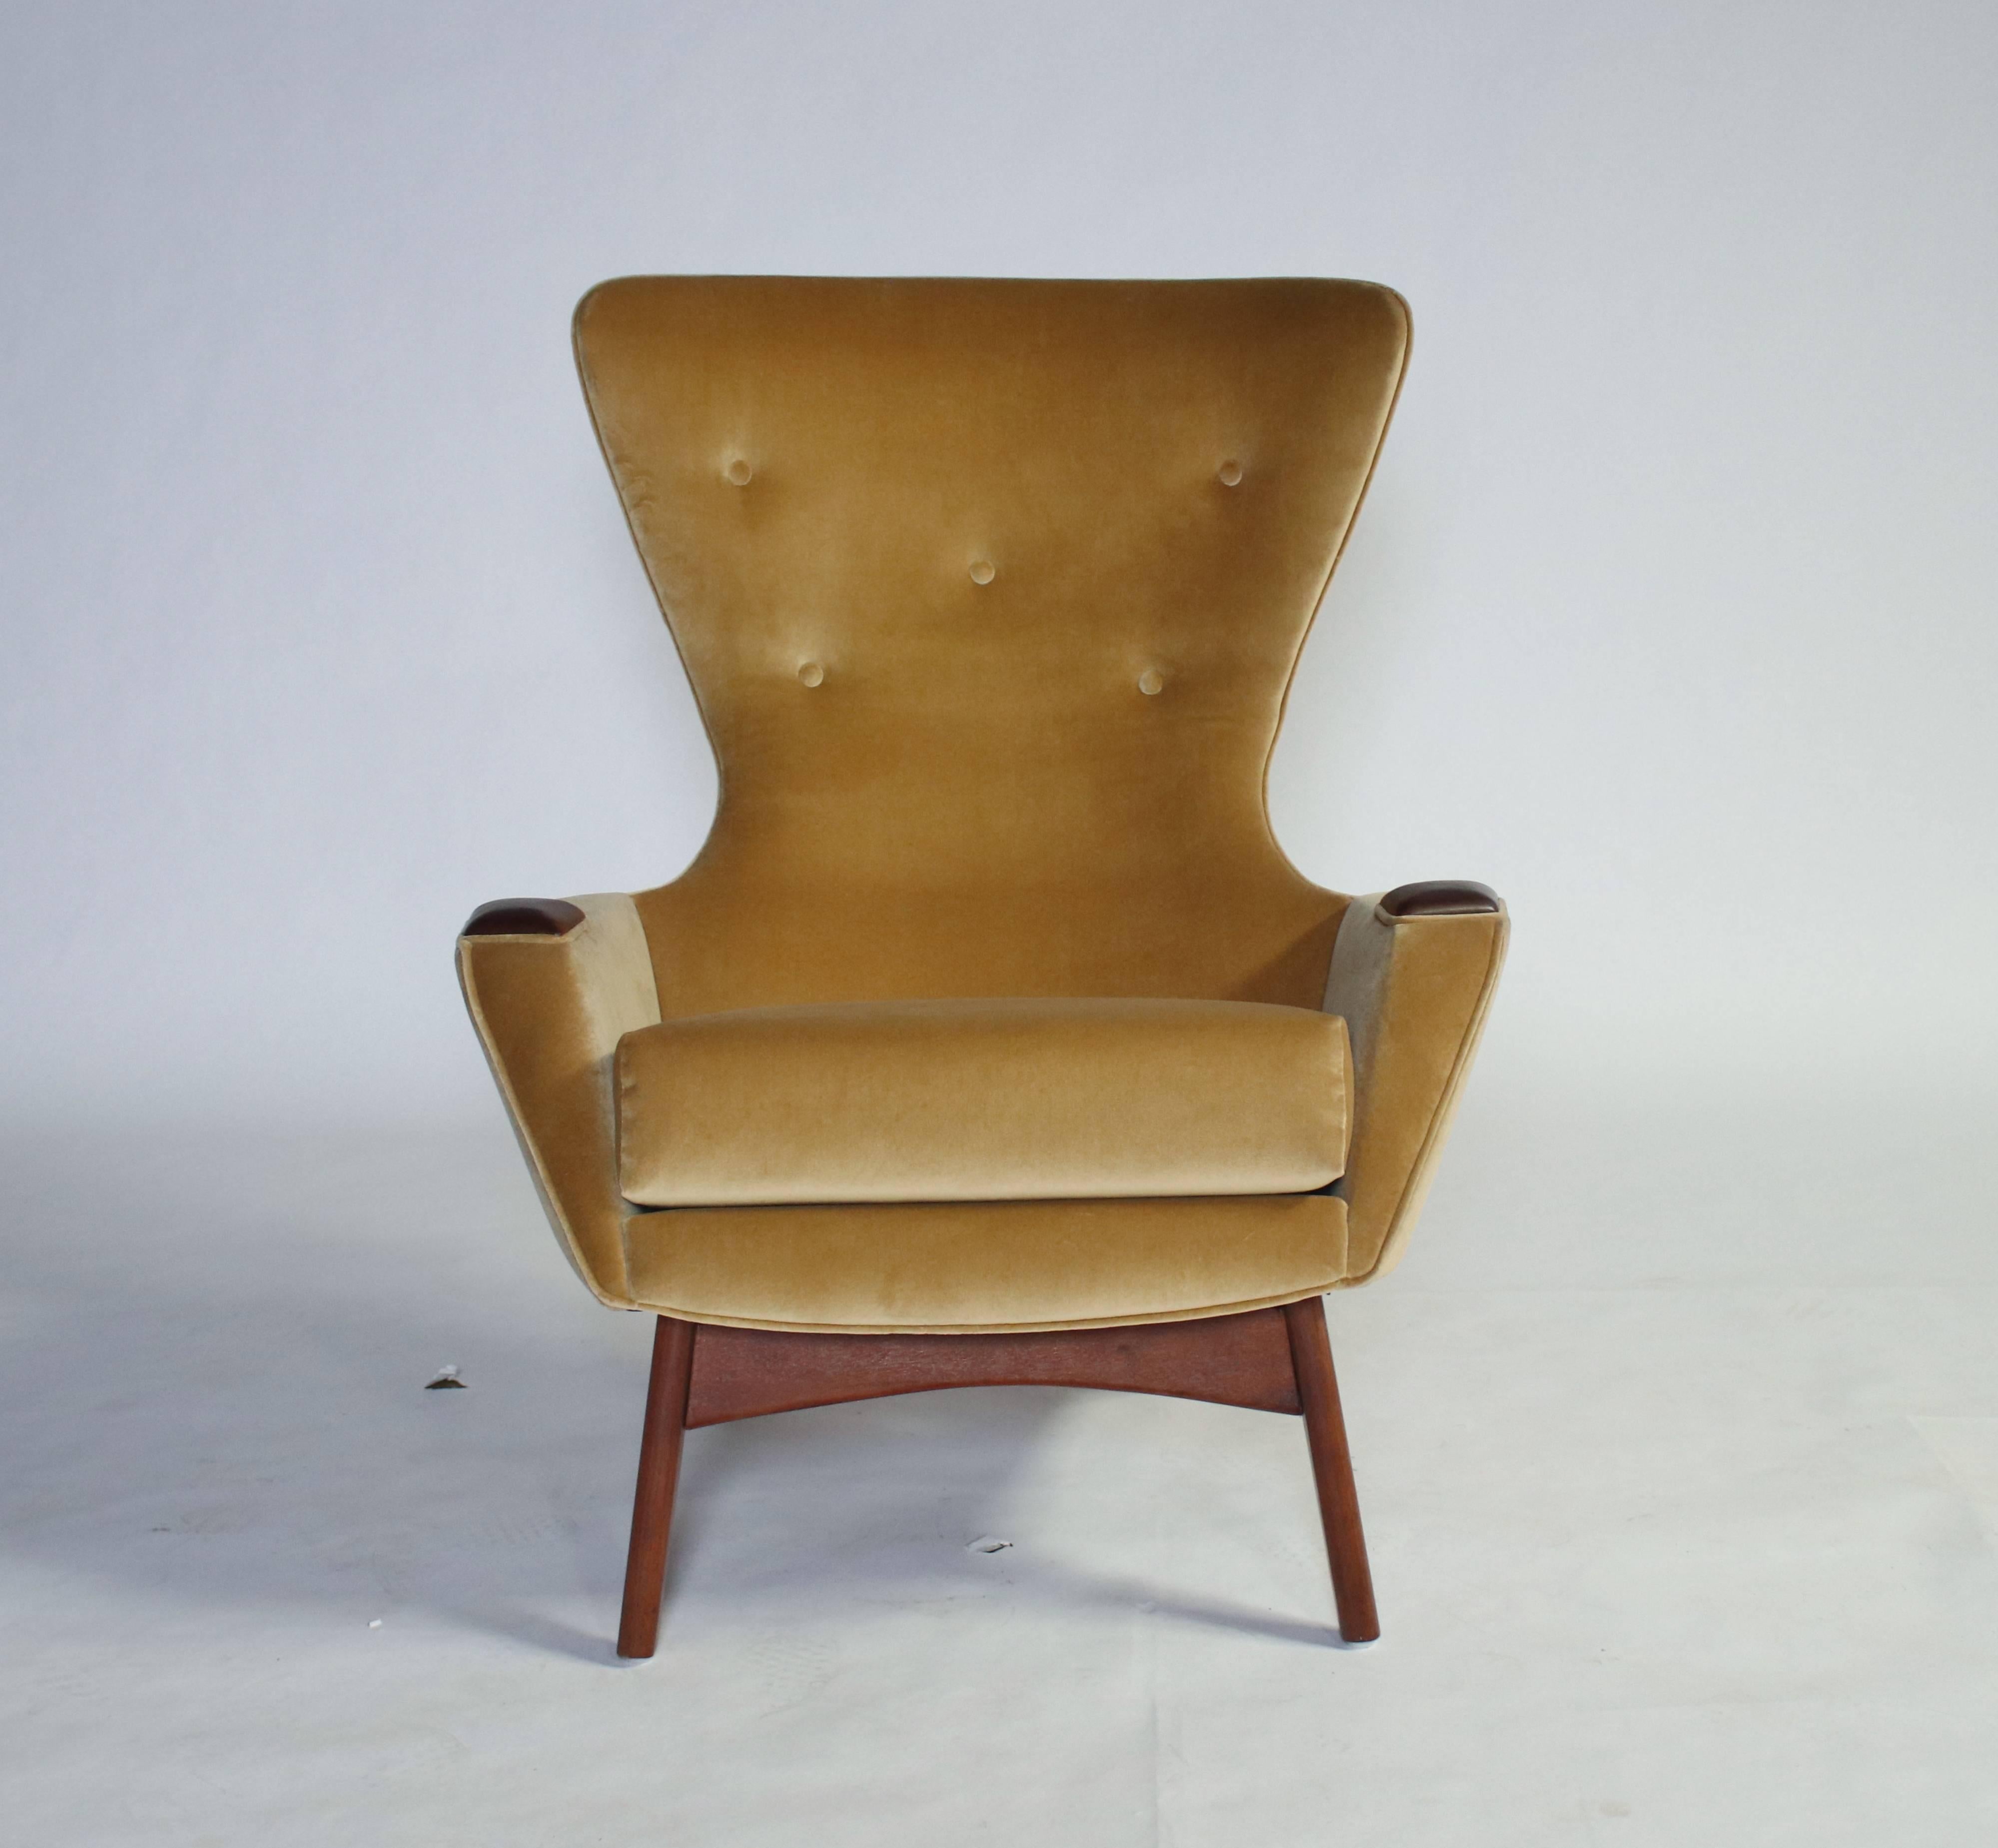 Adrian Pearsall wing chair for Craft Associates model 2231-C and matching ottoman. All newly upholstered in camel velvet and refinished walnut.
Measurements of the chair: 21.5